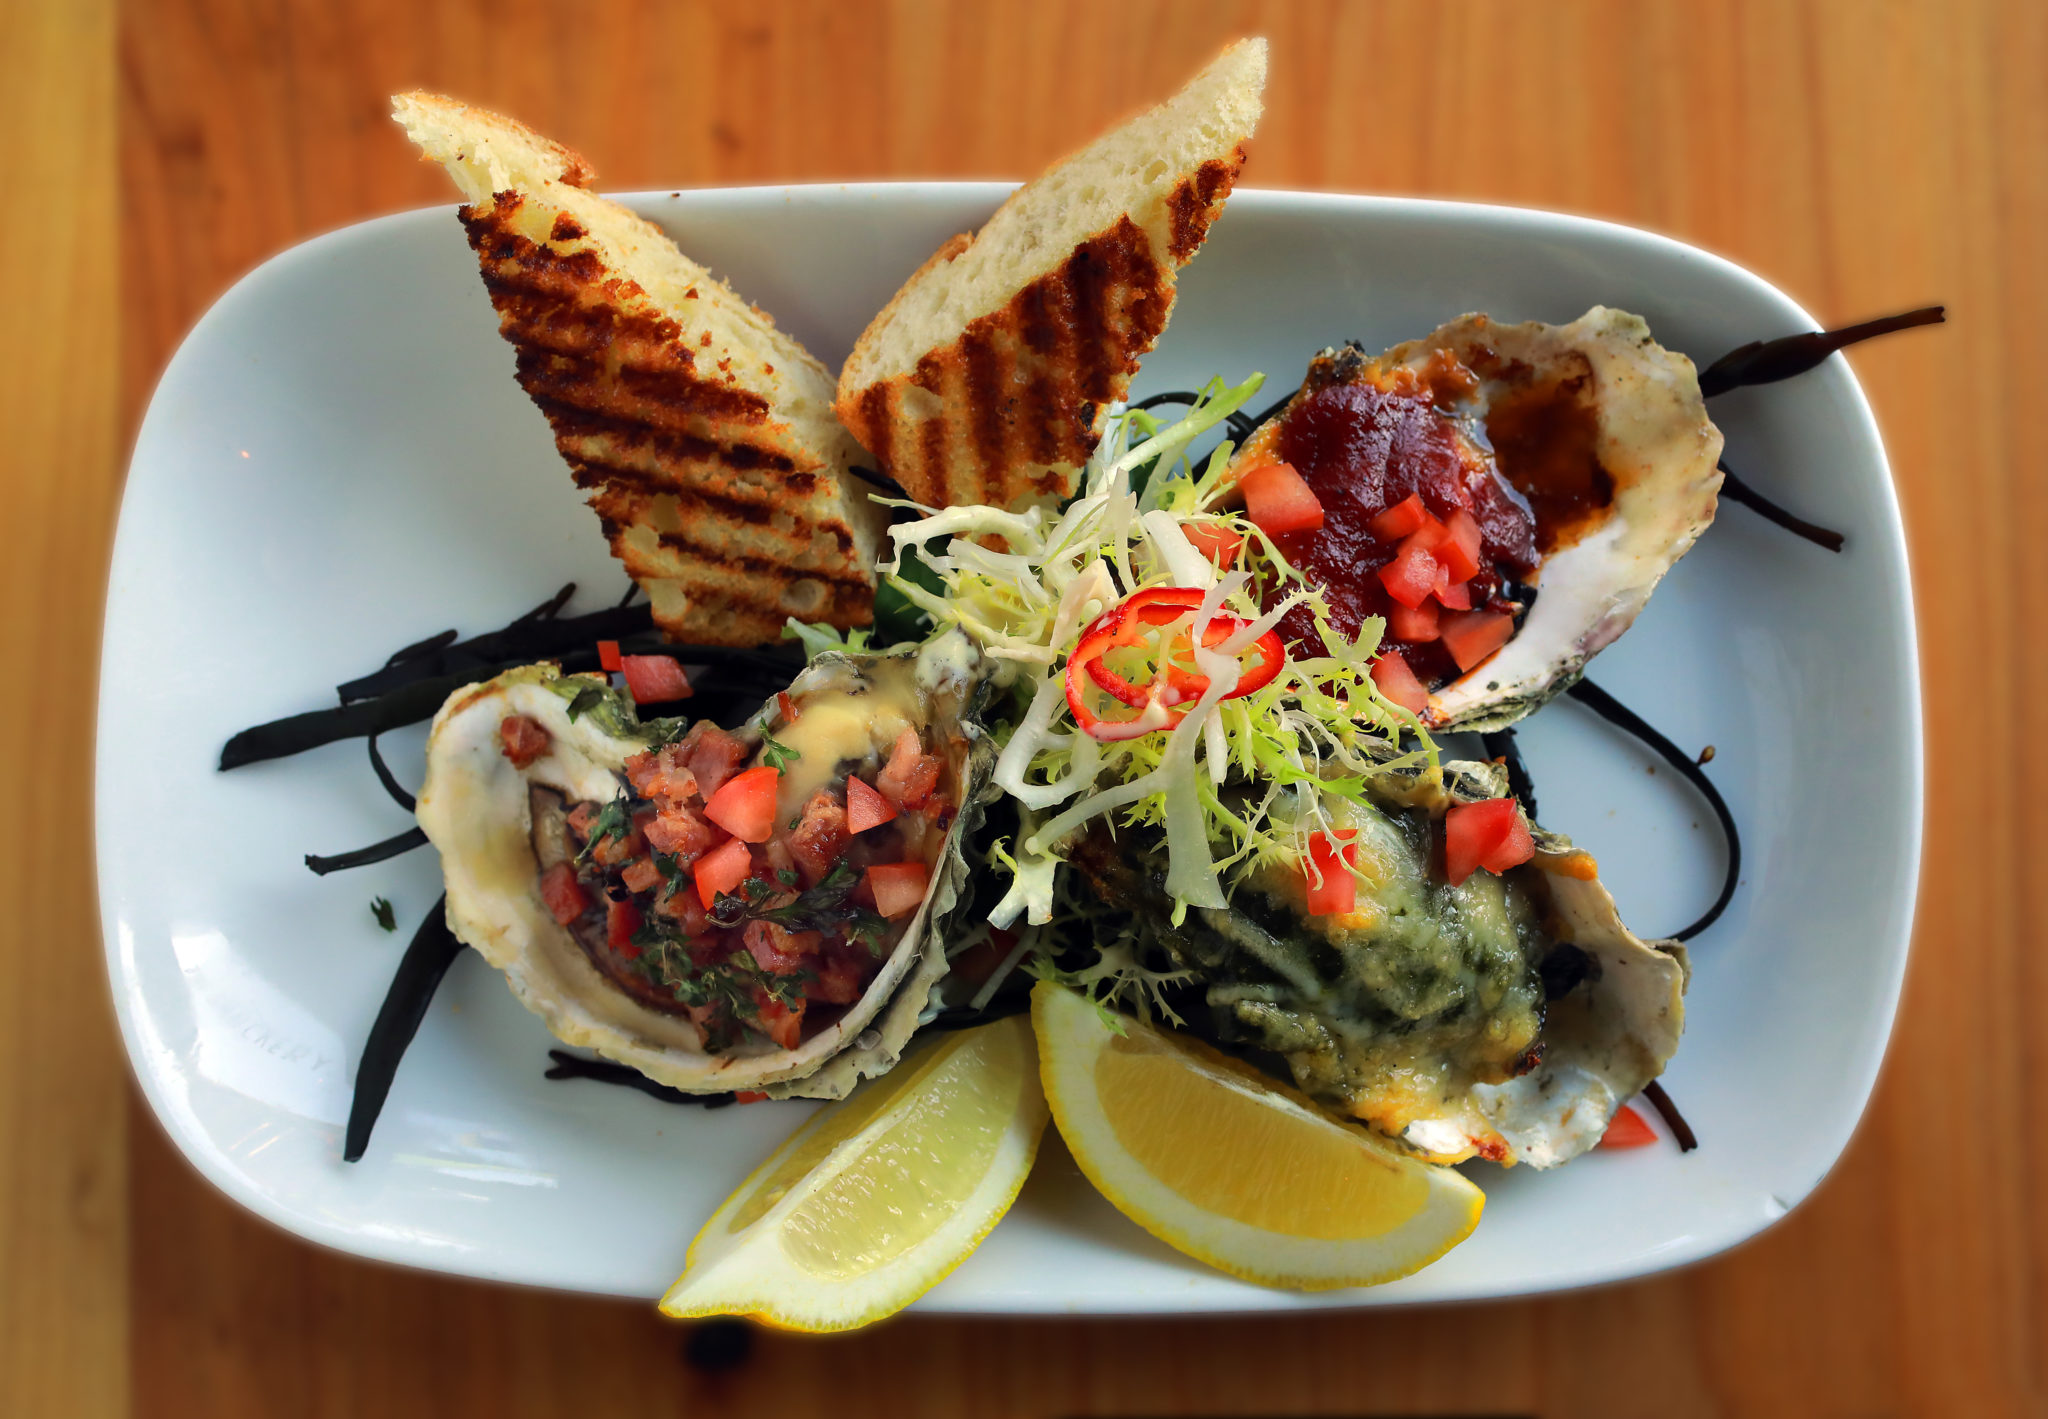 From left, Tasso Herb Grilled Oyster with cure ham and herb butter, Rockefeller Grilled Oyster with spinach, parmesan, Pernod, and garlic, Classic Chipotle BBQ Oyster all served with lemon and grilled baguette from The Shuckery in Petaluma. (John Burgess/The Press Democrat)